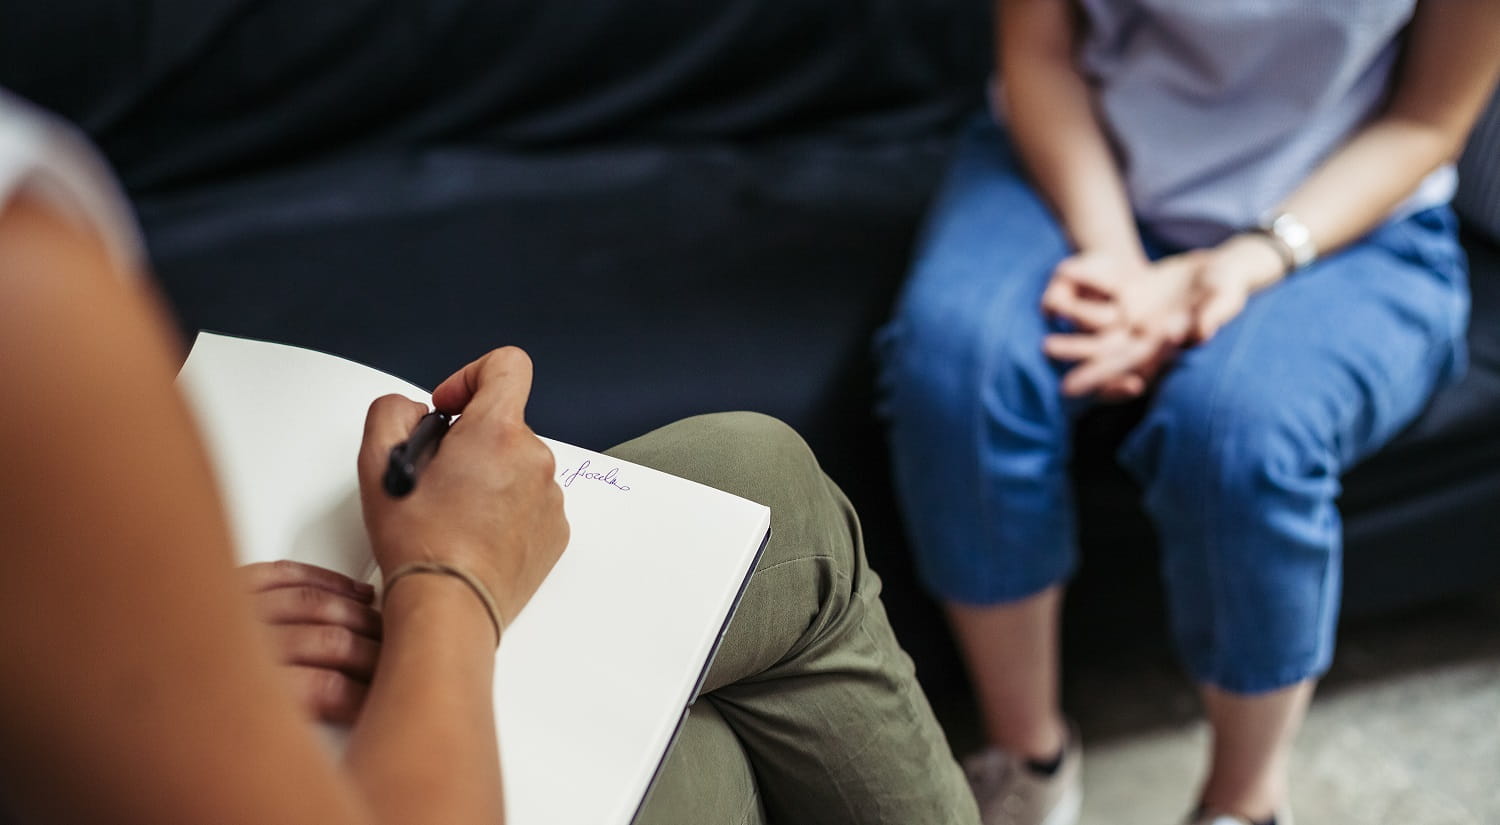 A  therapist takes notes in a book from a patient sitting in opposite chair.